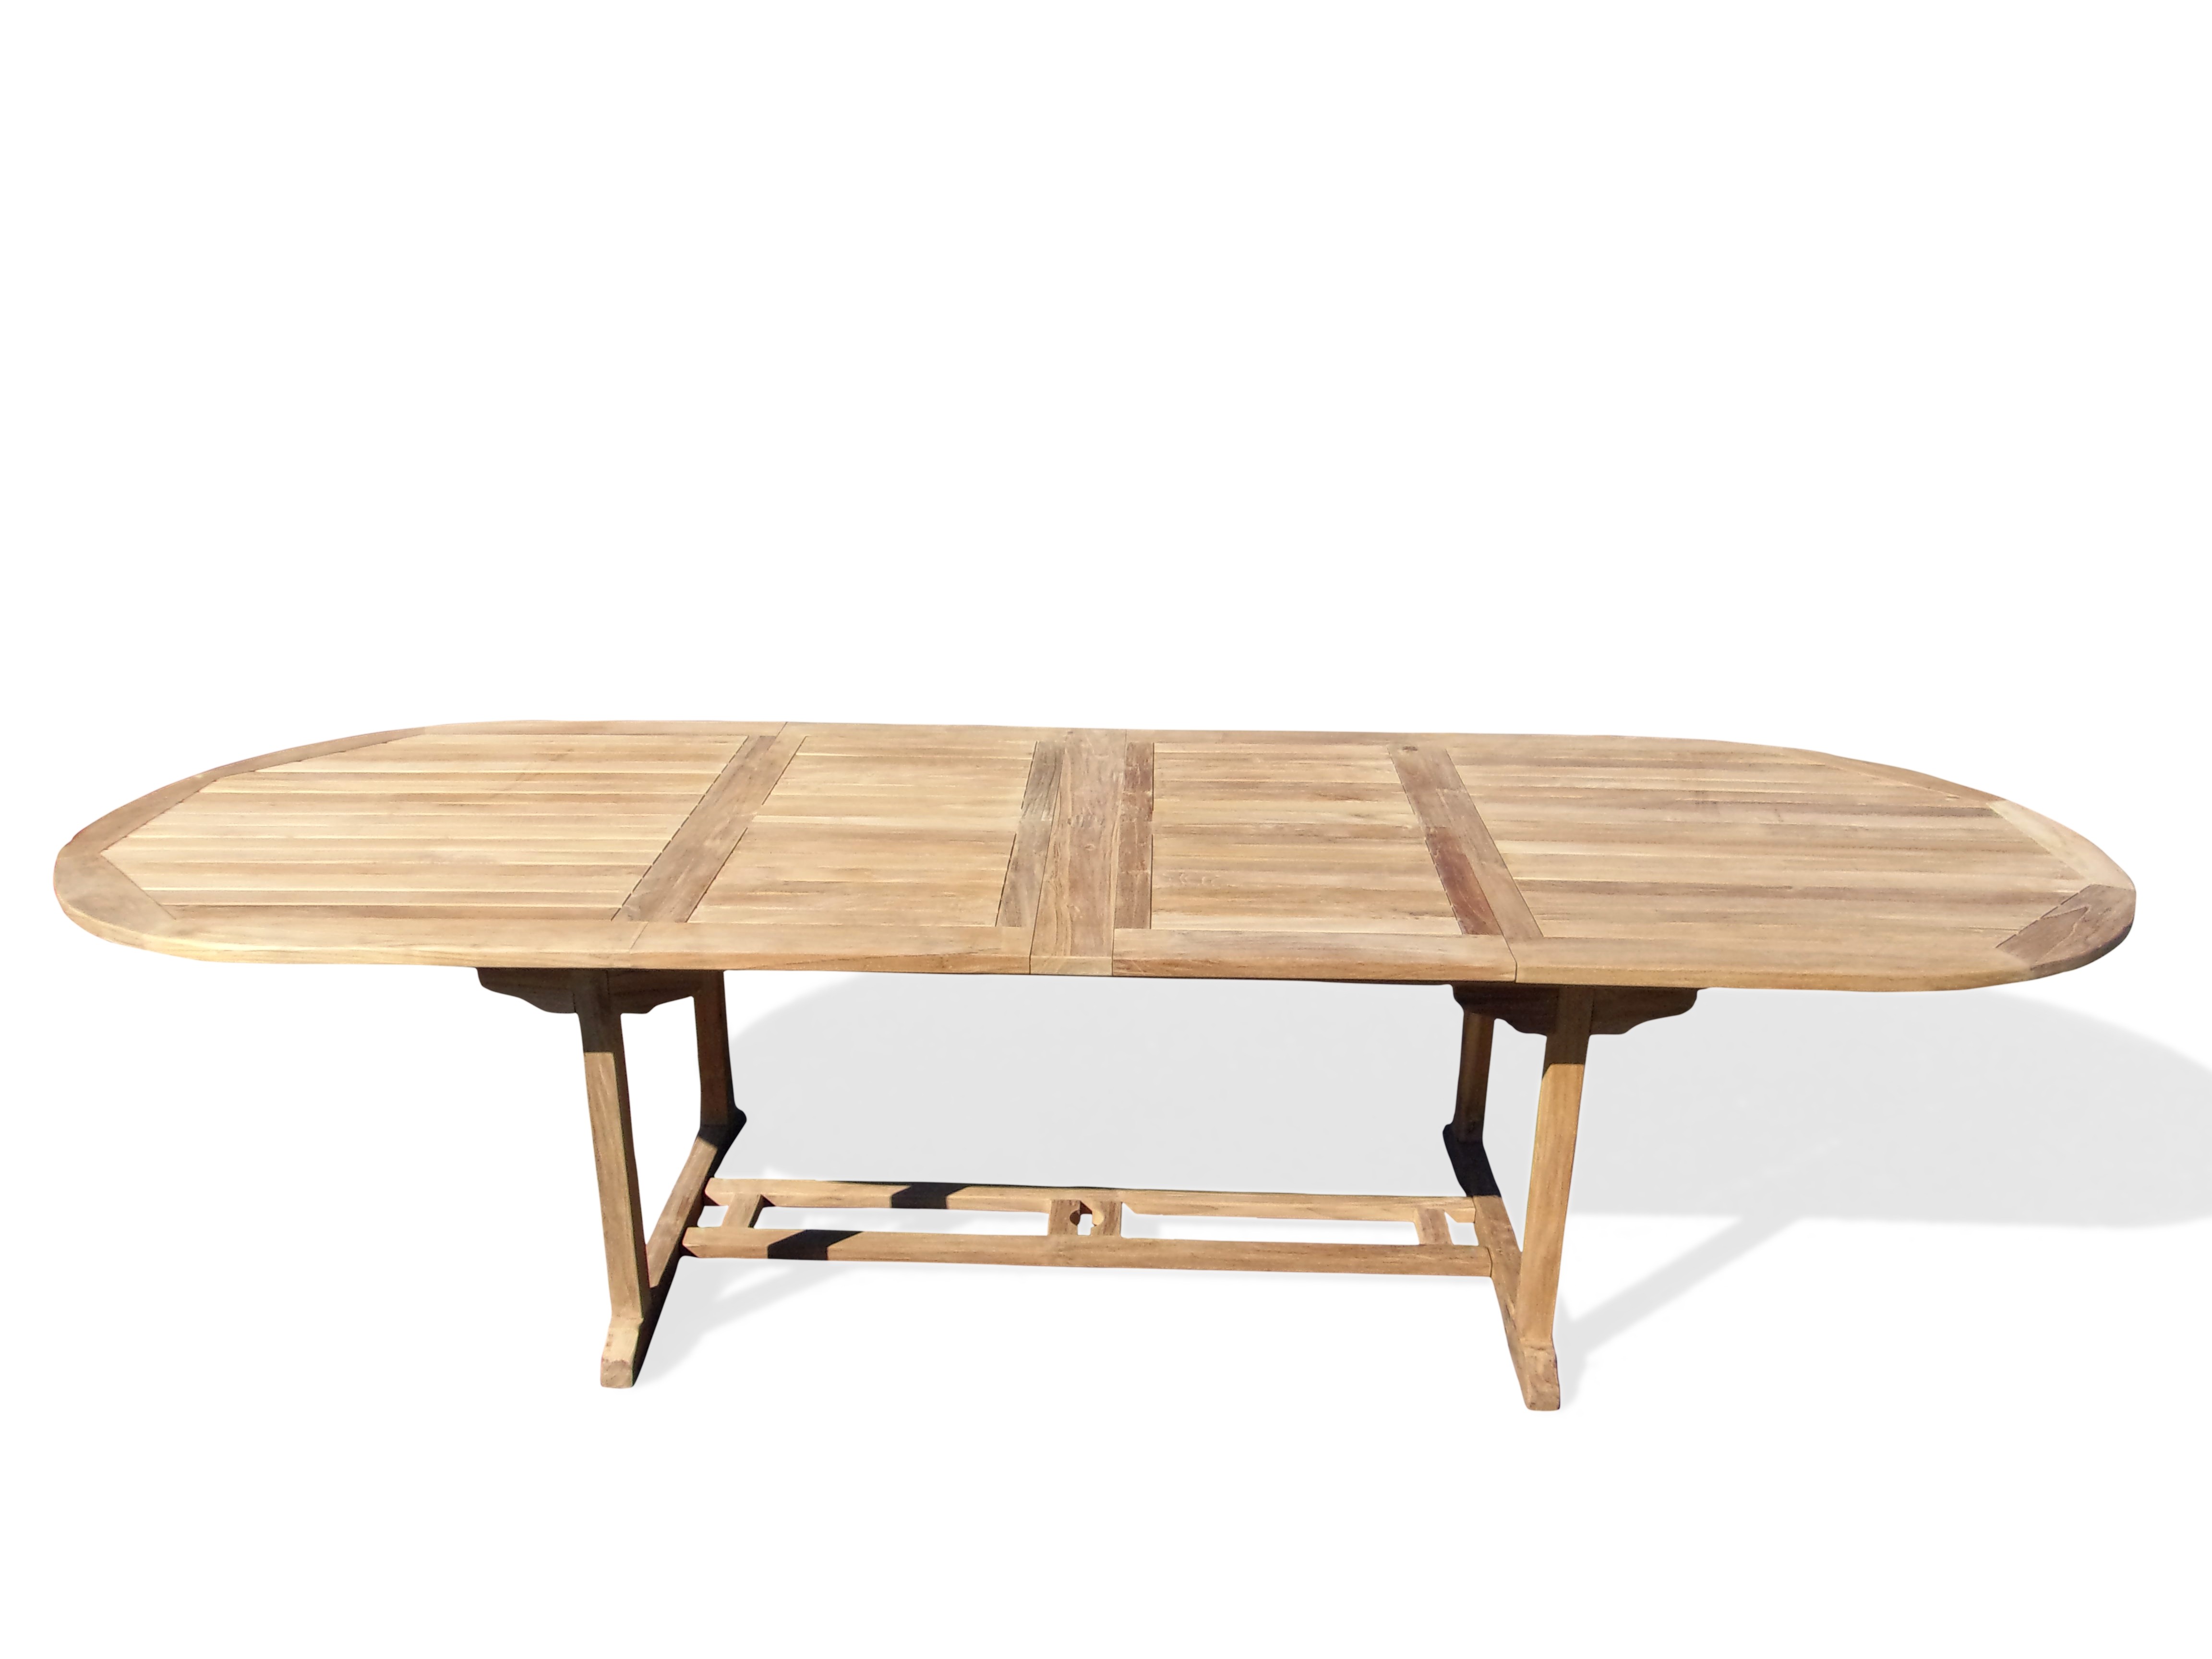 Grade A Teak Buckingham 138" x 39" Oval Double Leaf Extension Table...(11.5 Foot Long Table) Seats 12-14 Adults....makes 3 Different Size Tables